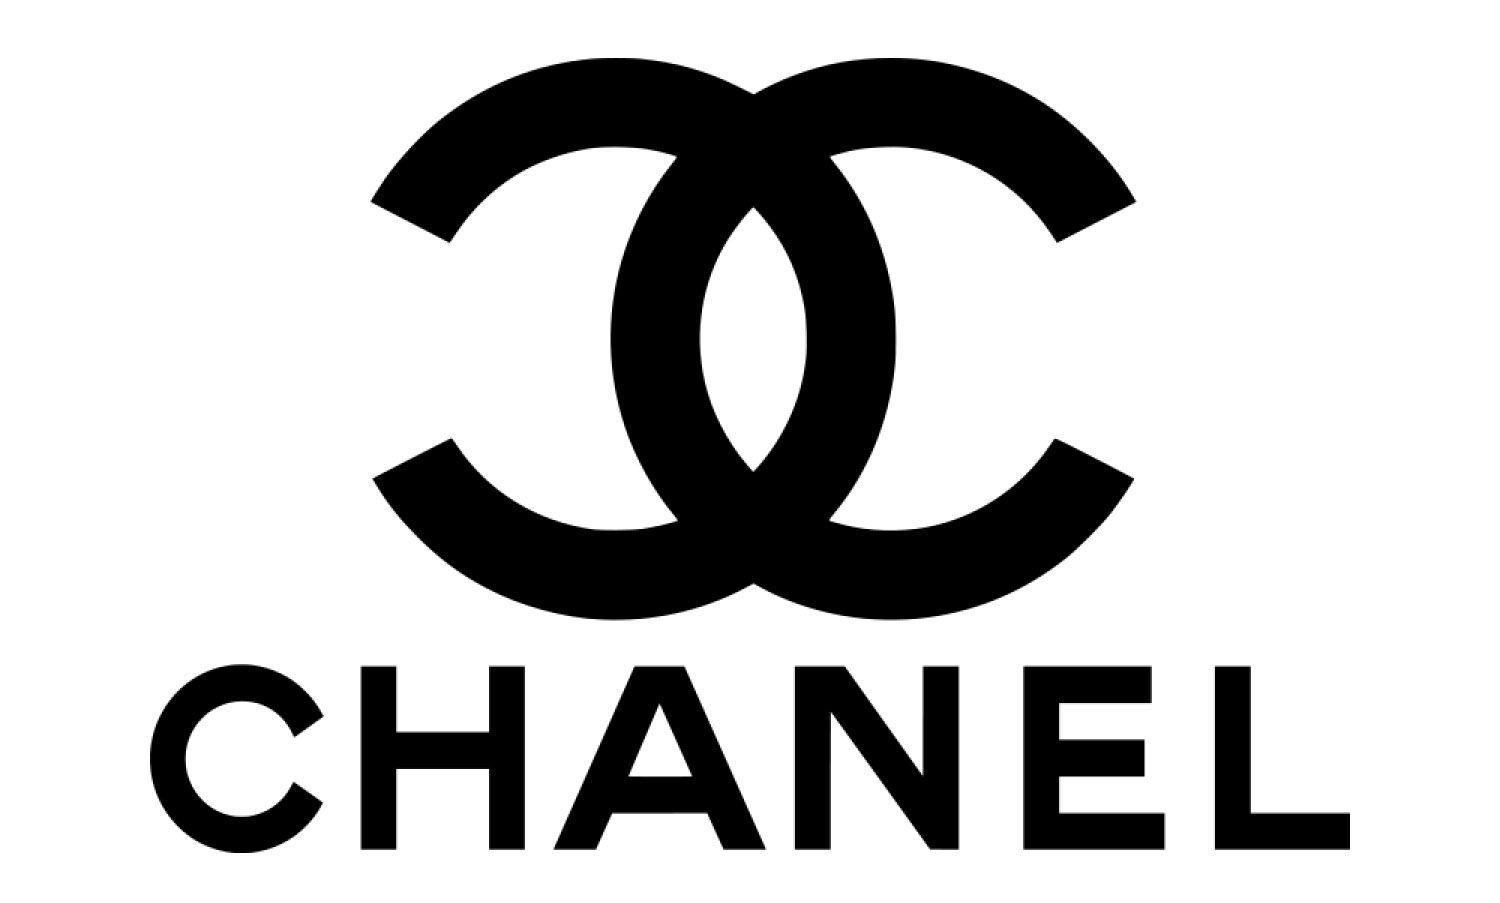 Colorful Chanel Logo - Chanel Logo, Chanel Symbol Meaning, History and Evolution